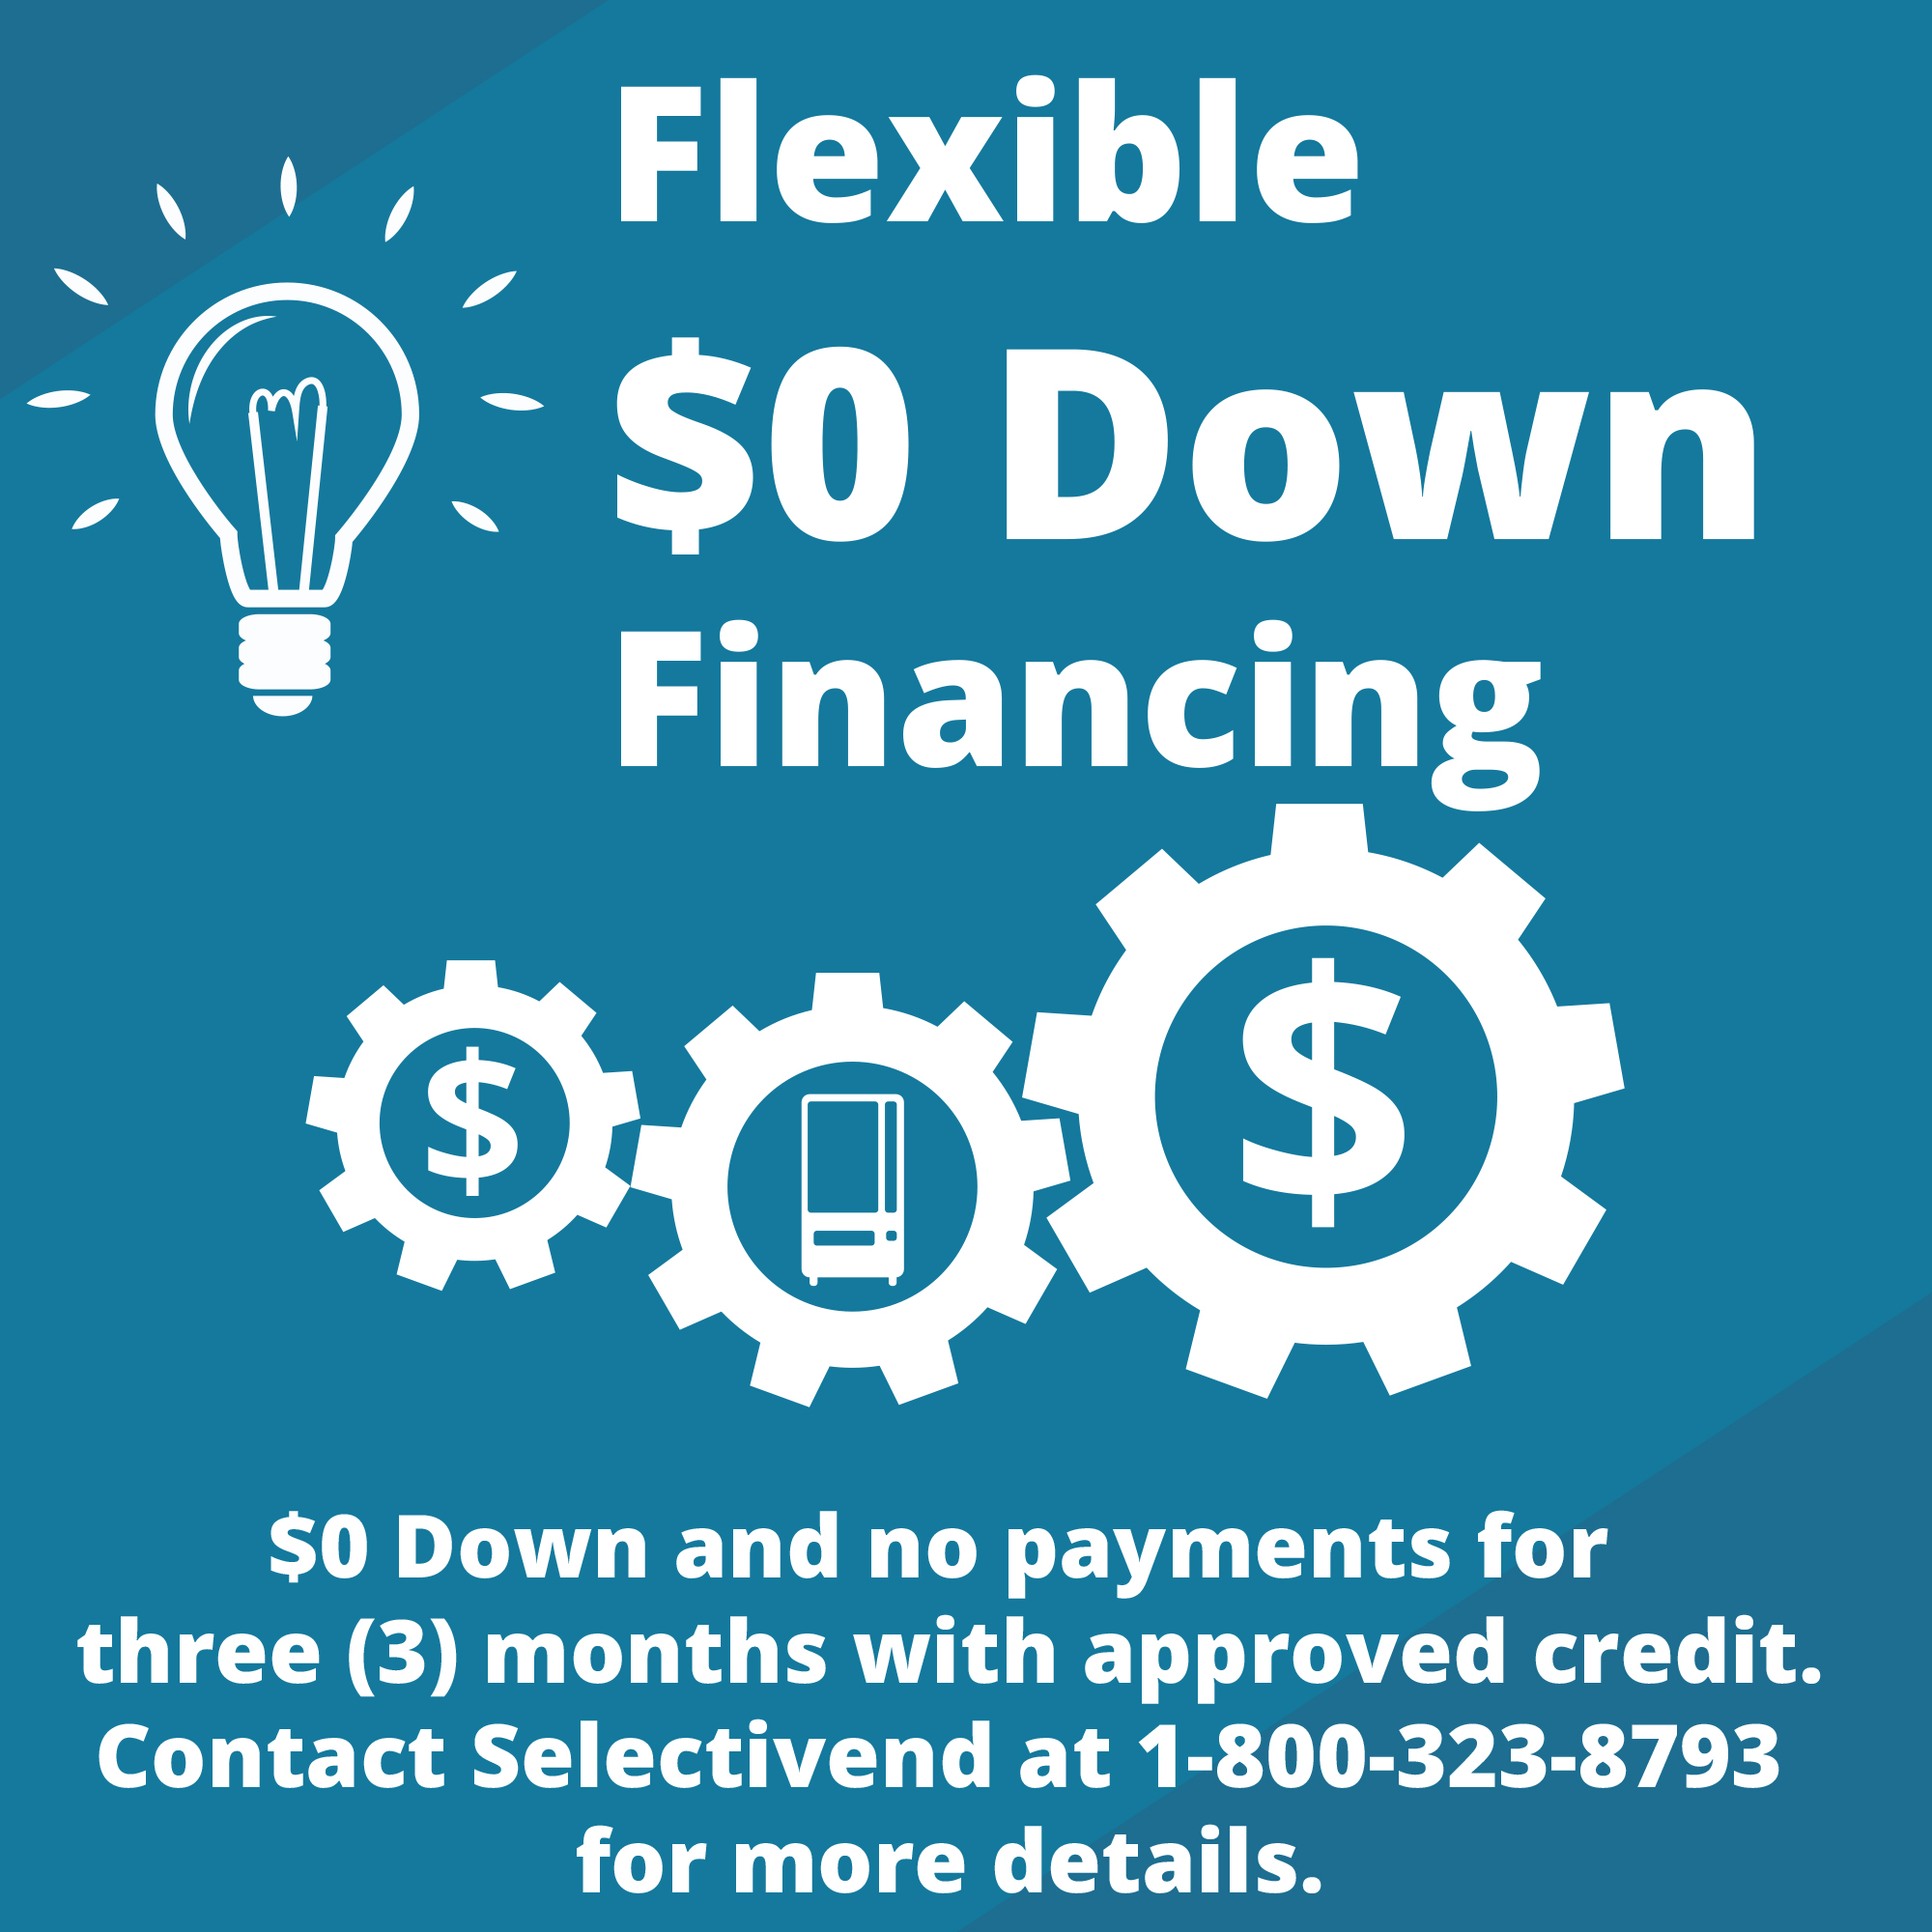 Selectivend offers customers flexible $0 down financing options to grow their vending business.